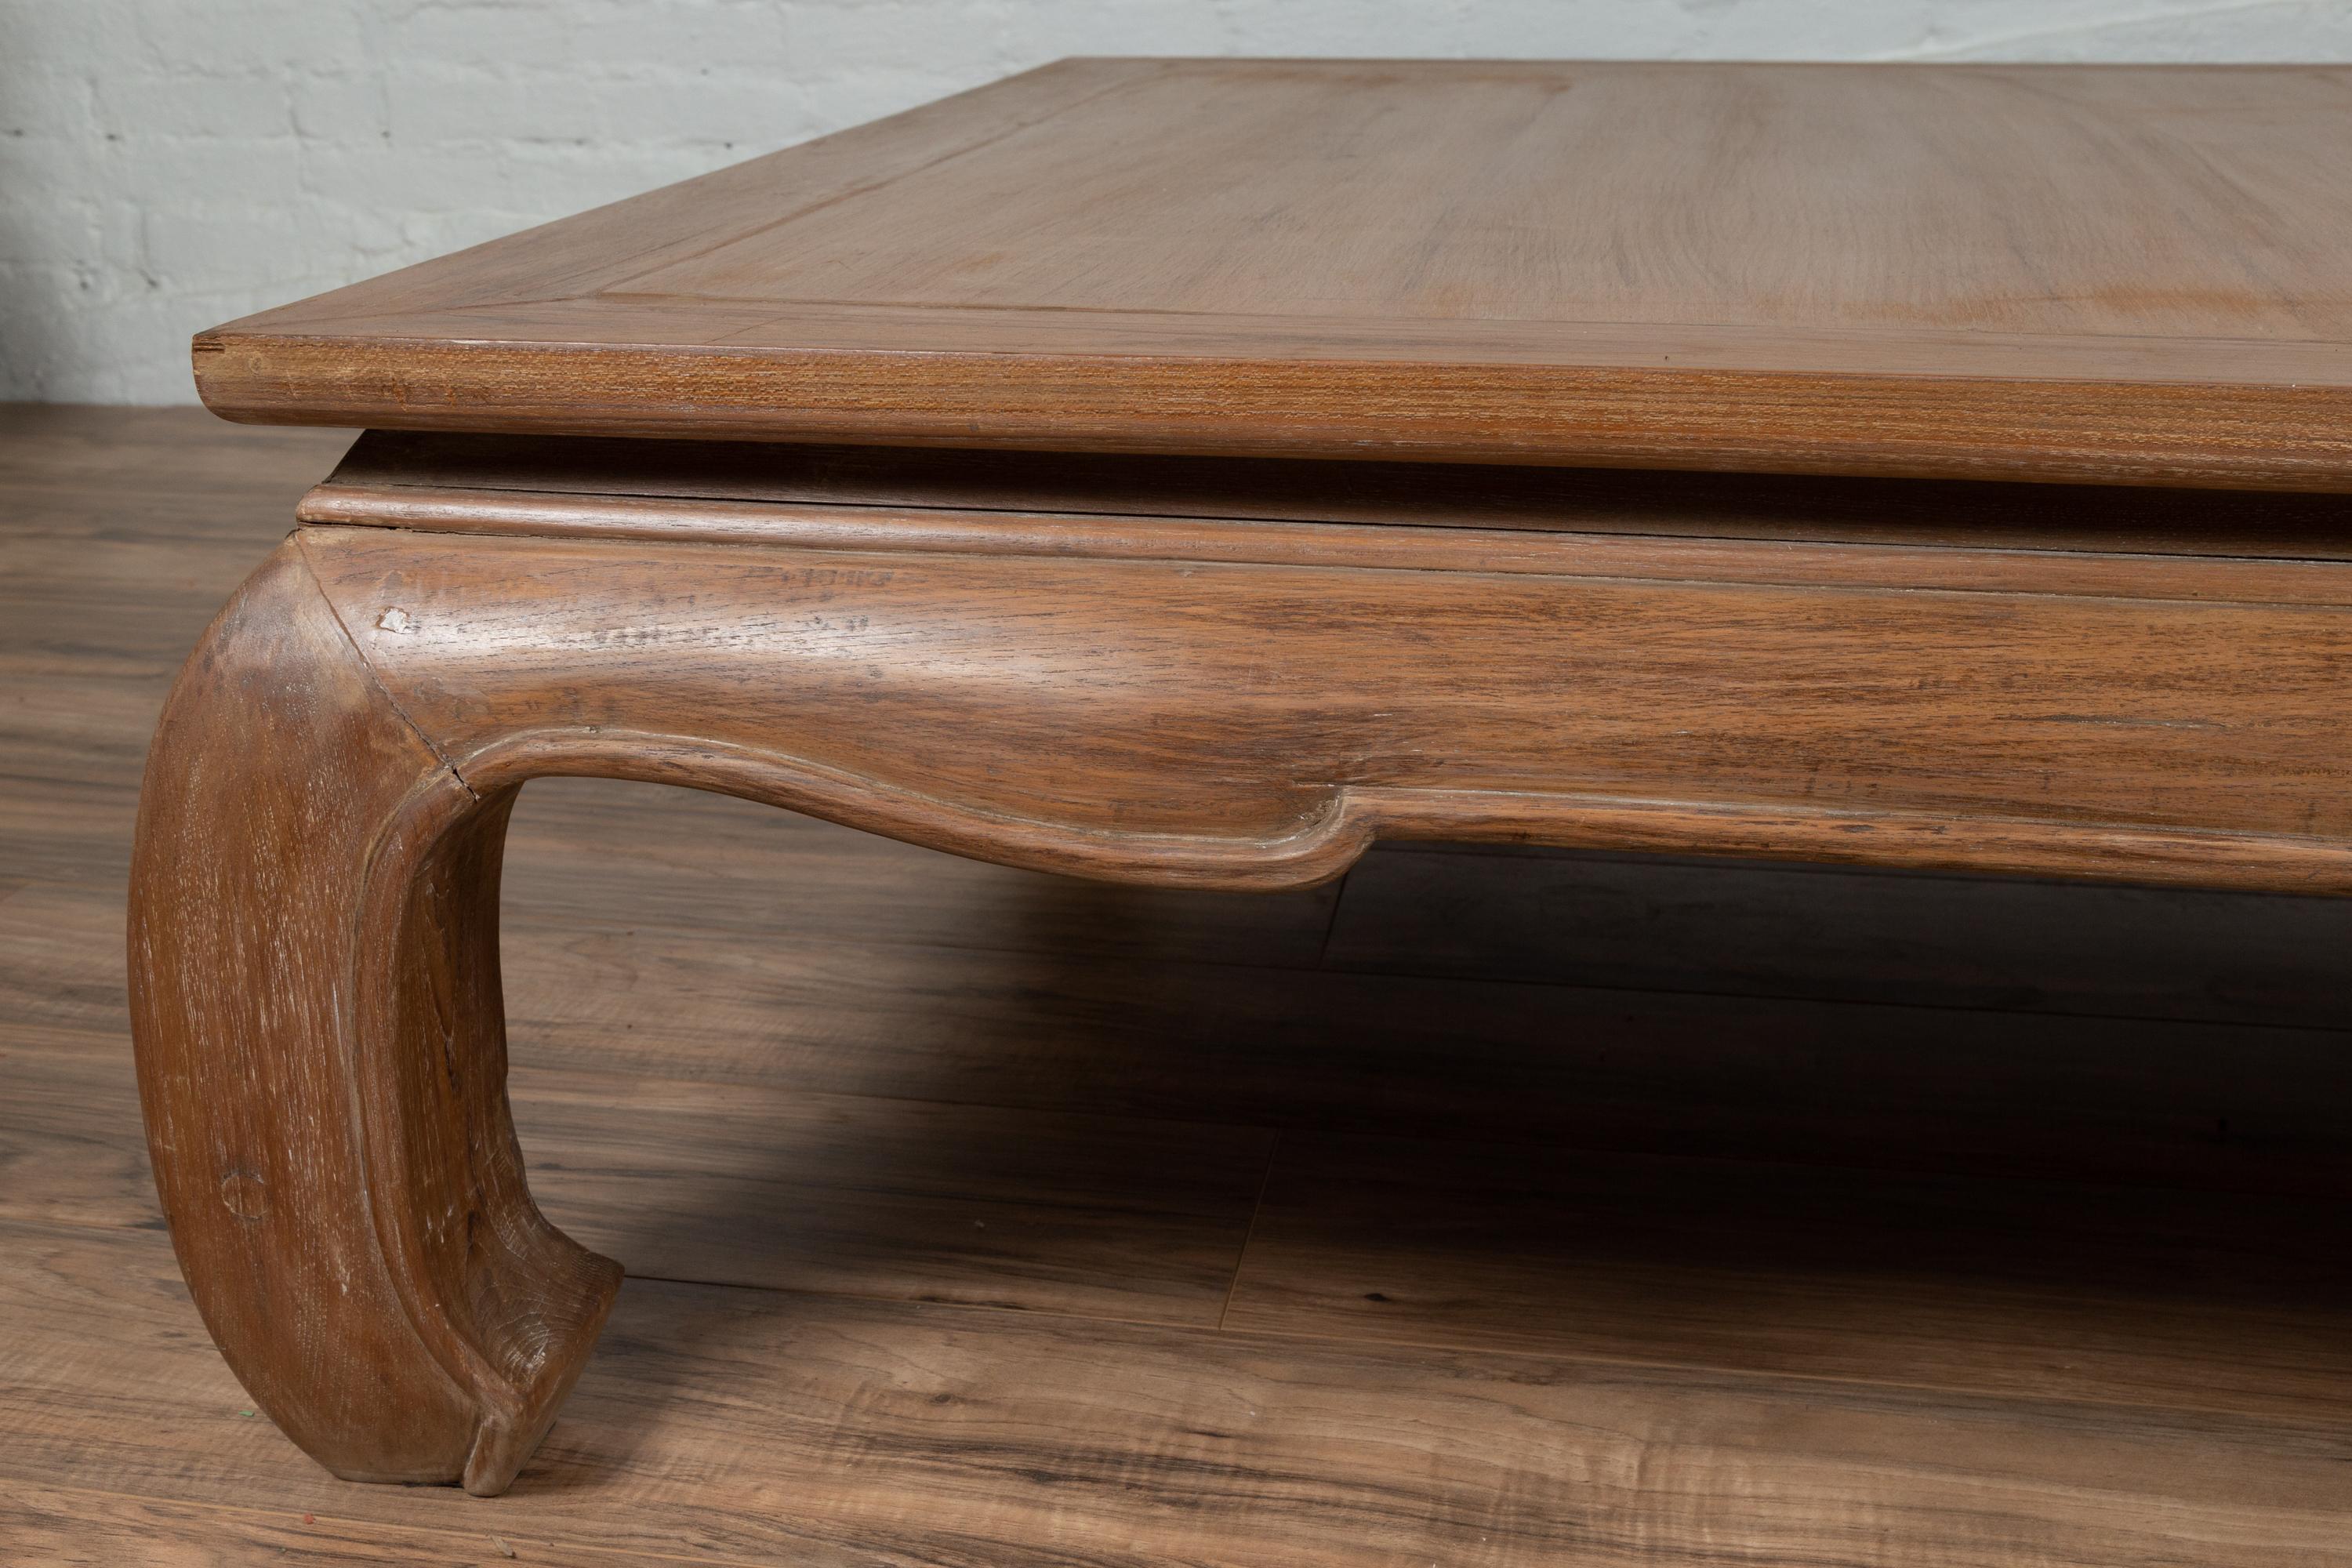 20th Century Chinese Antique Coffee Table with Natural Patina, Bulging Legs and Waisted Apron